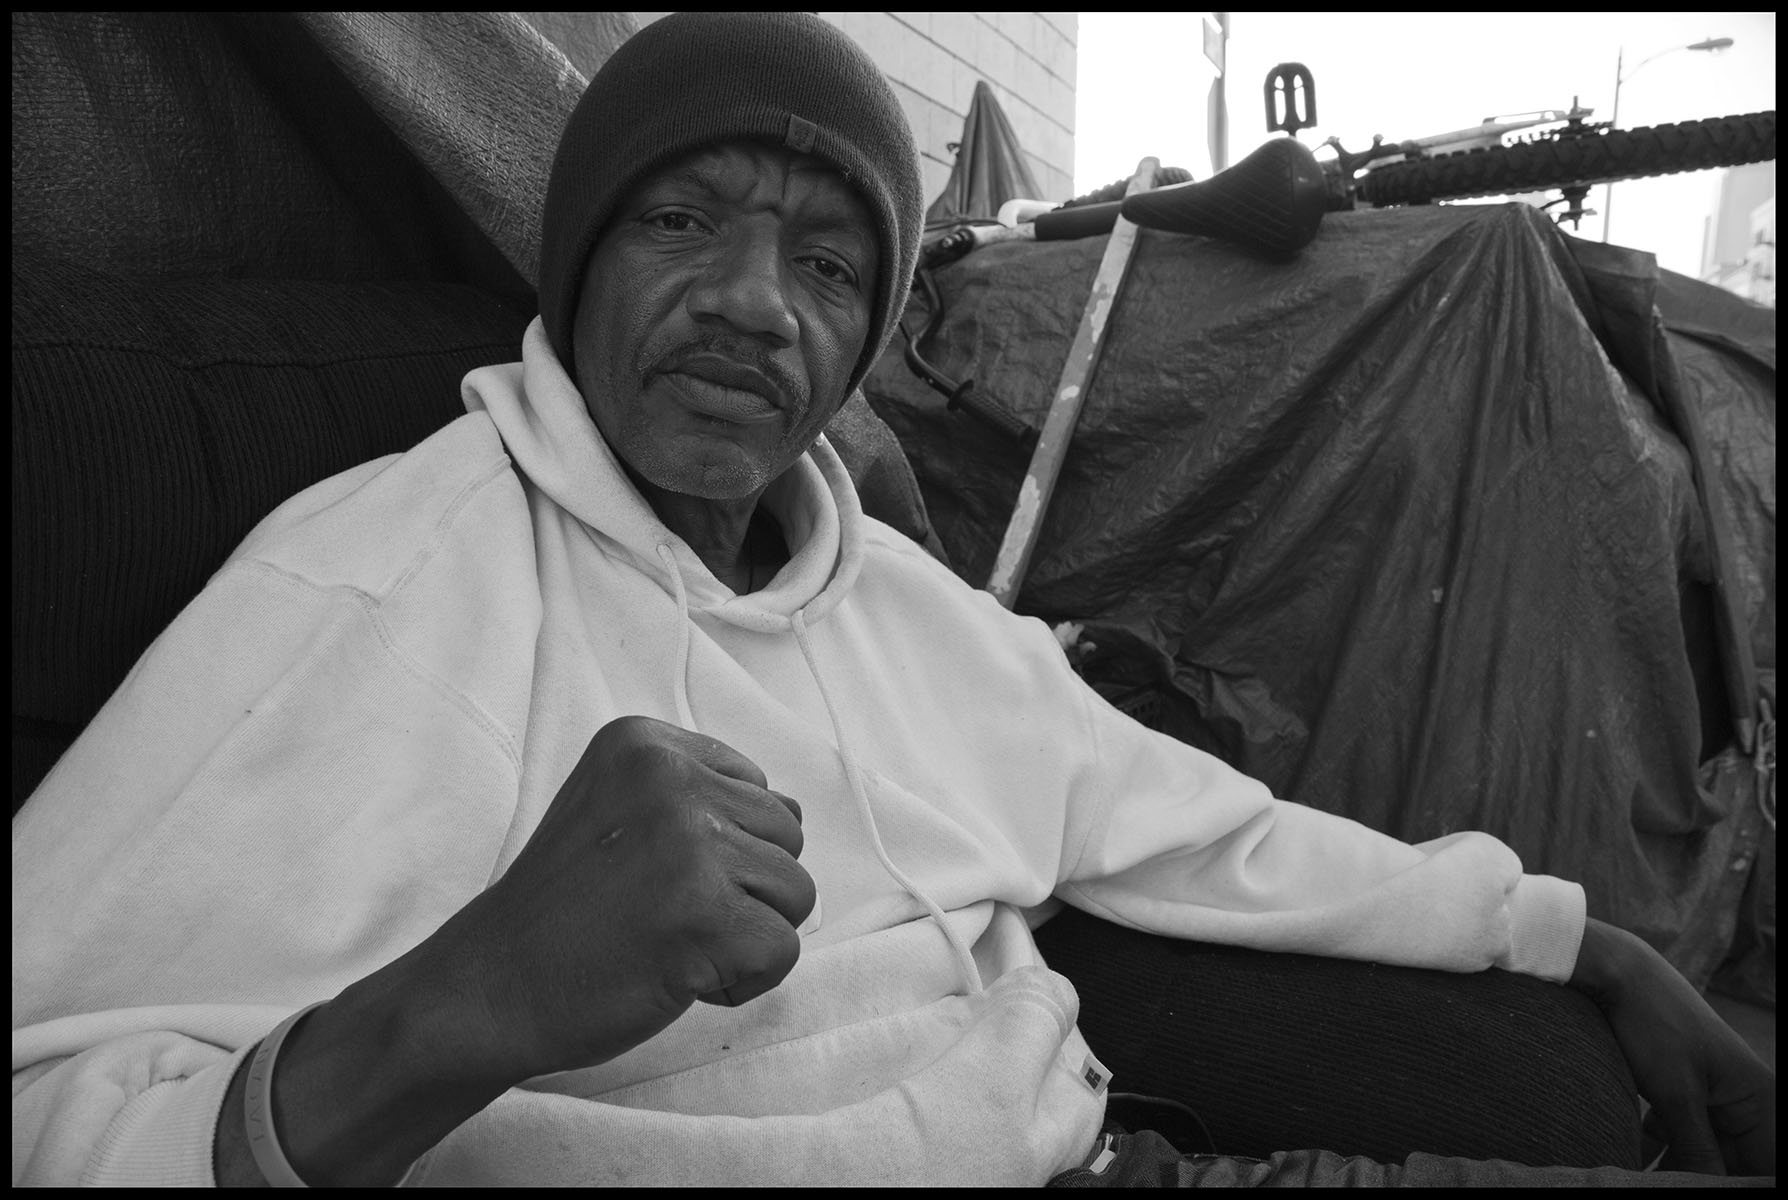 General TC calls himself "The Peoples' General and lives on the sidewalk on Skid Row. 2014, Los Angeles. The David Bacon Archive, Department of Special Collections, Stanford Libraries.